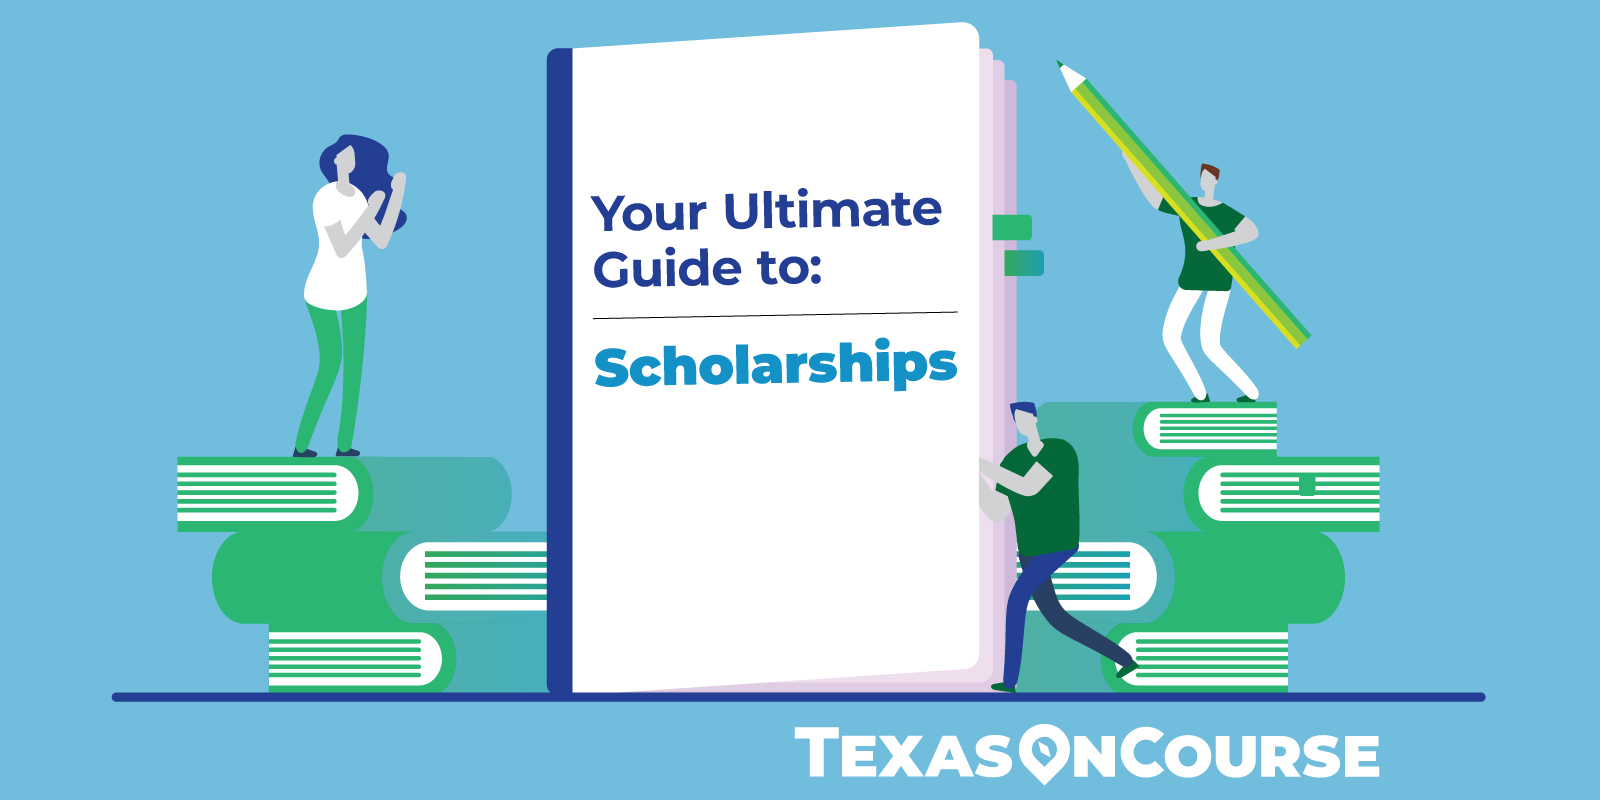 Your ultimate guide to scholarships